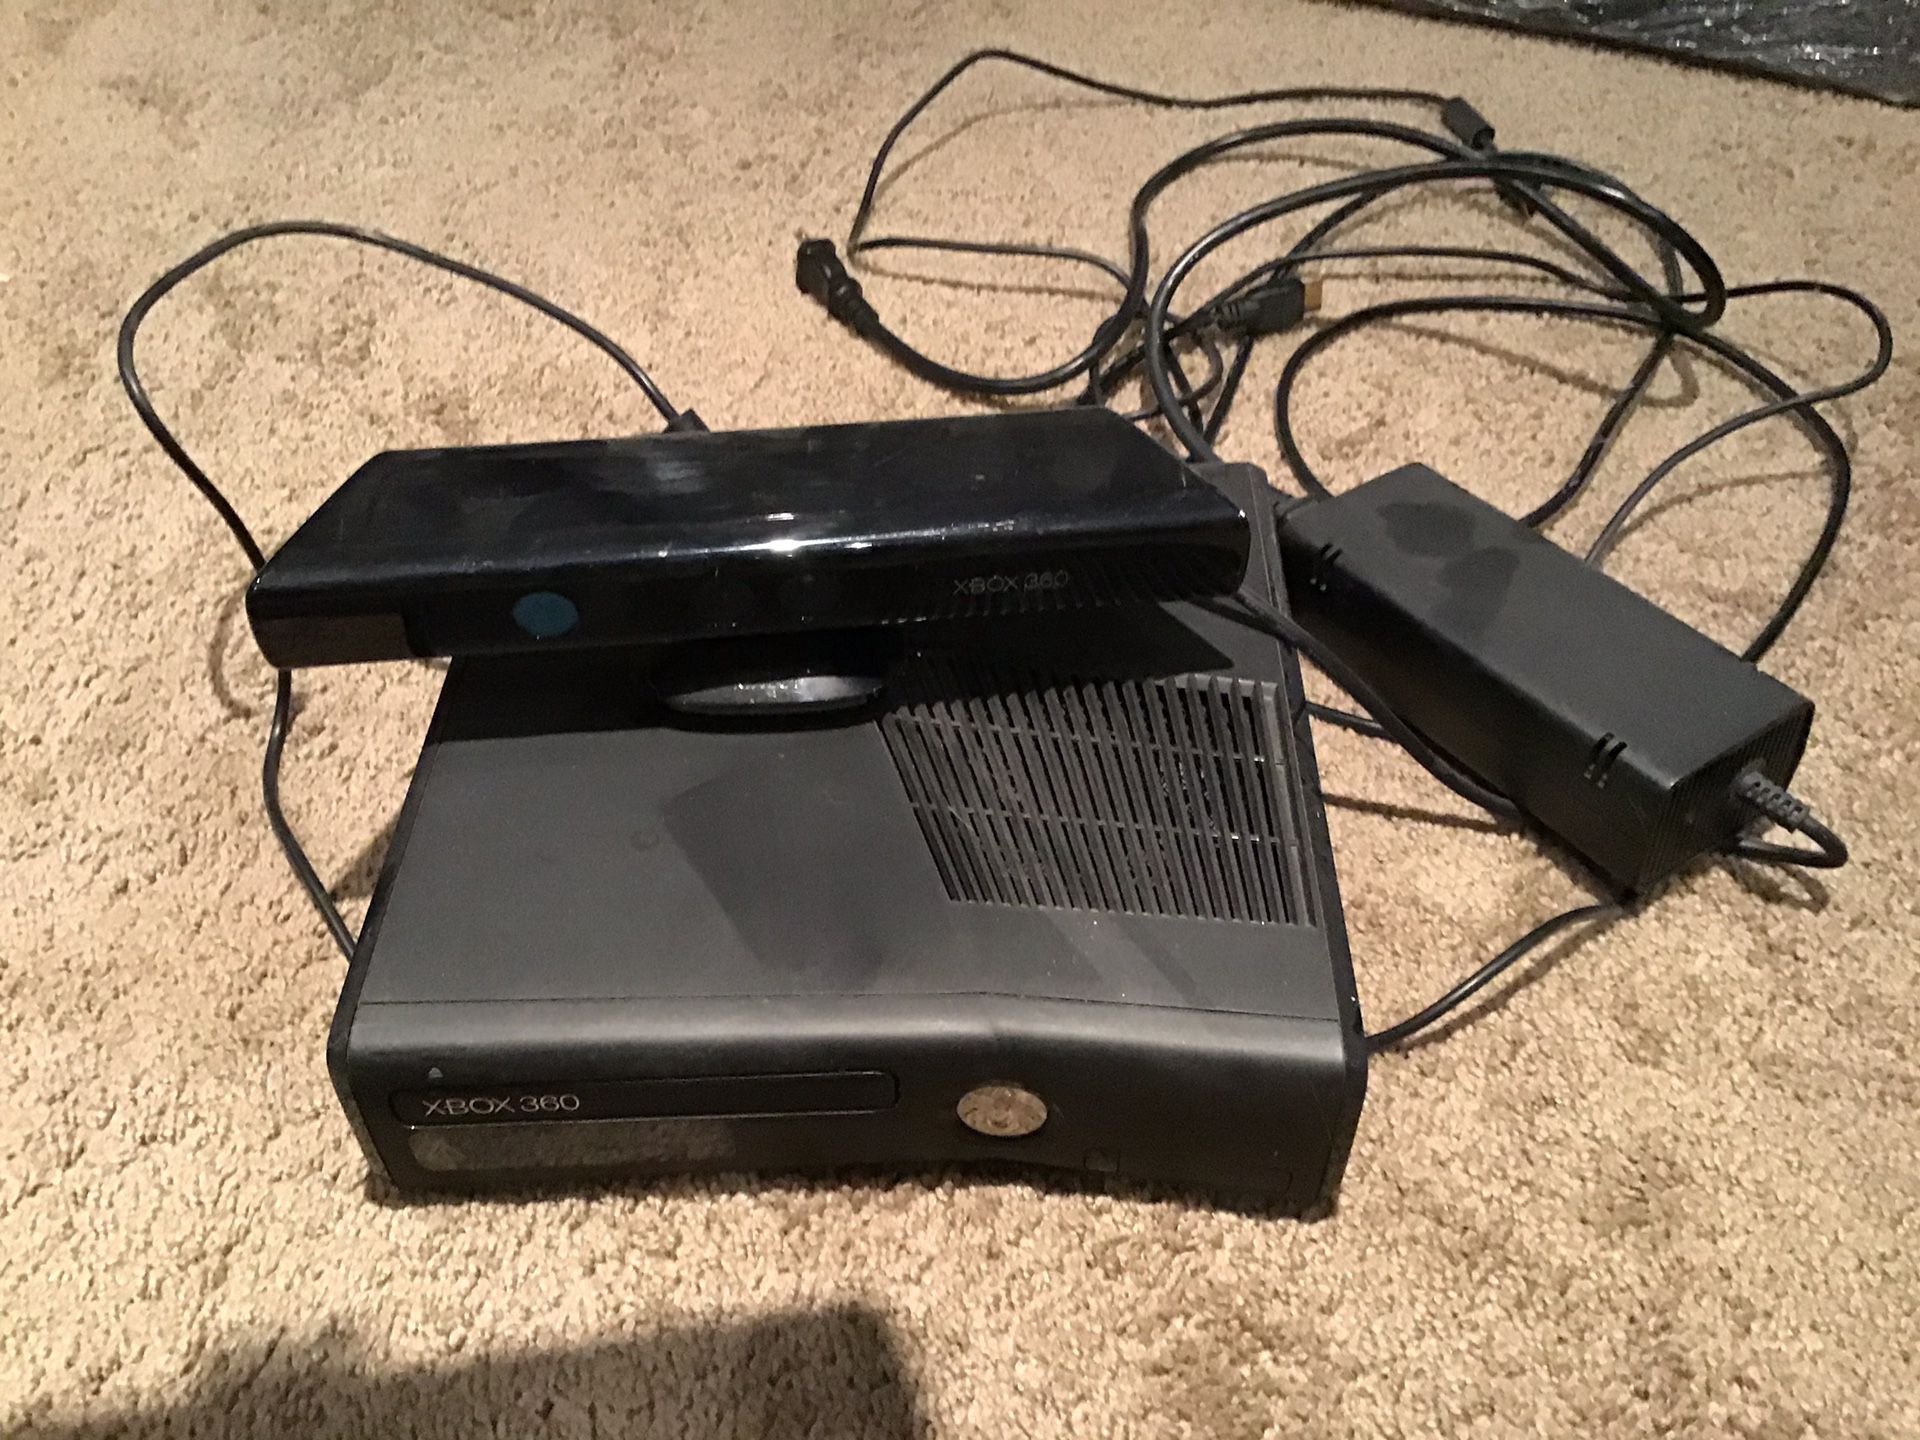 Xbox 360 Gaming system with Kinect